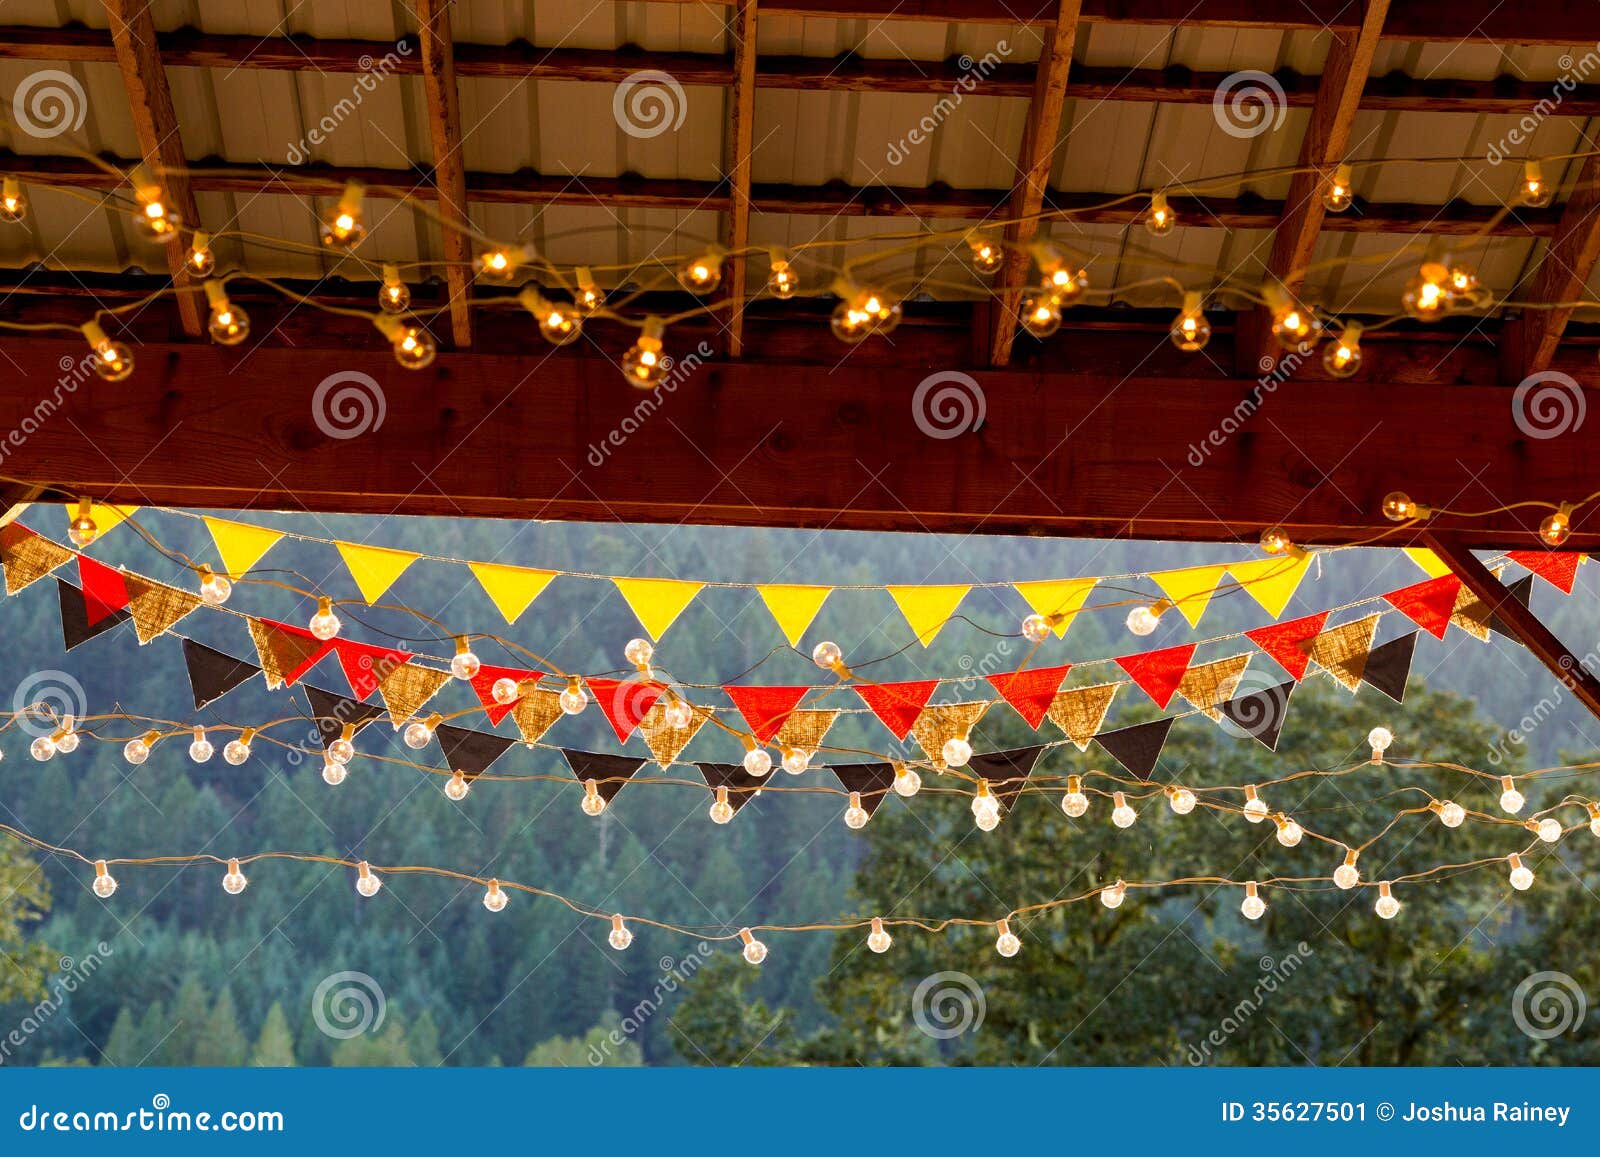 https://thumbs.dreamstime.com/z/hanging-strands-lights-wedding-reception-hung-to-create-night-illuminated-dance-floor-outdoor-event-35627501.jpg